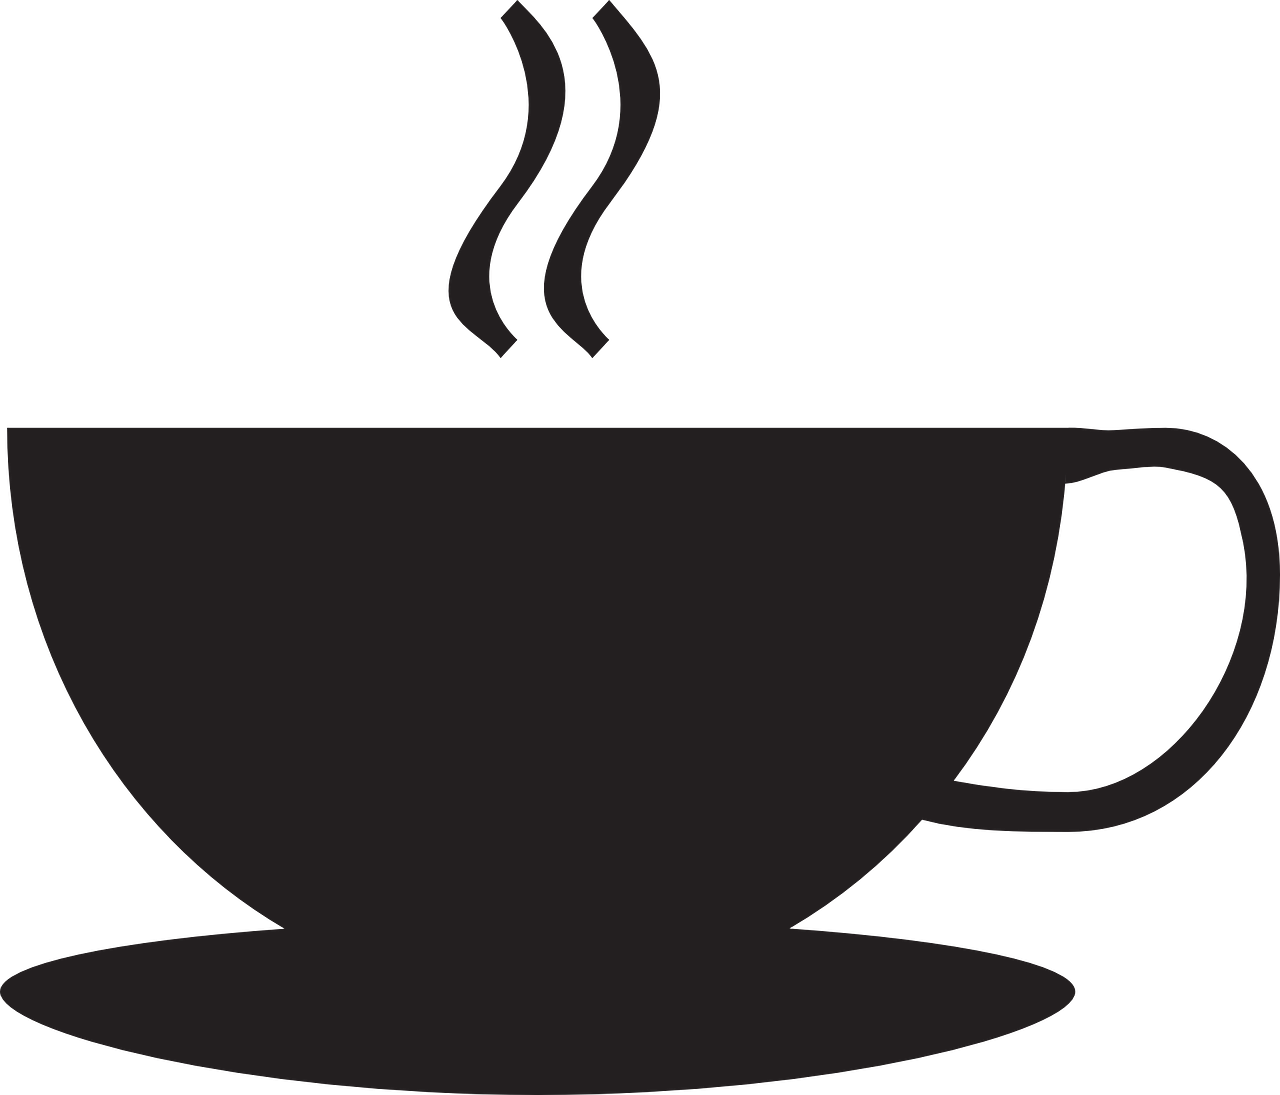 A Black And White Silhouette Of A Cup